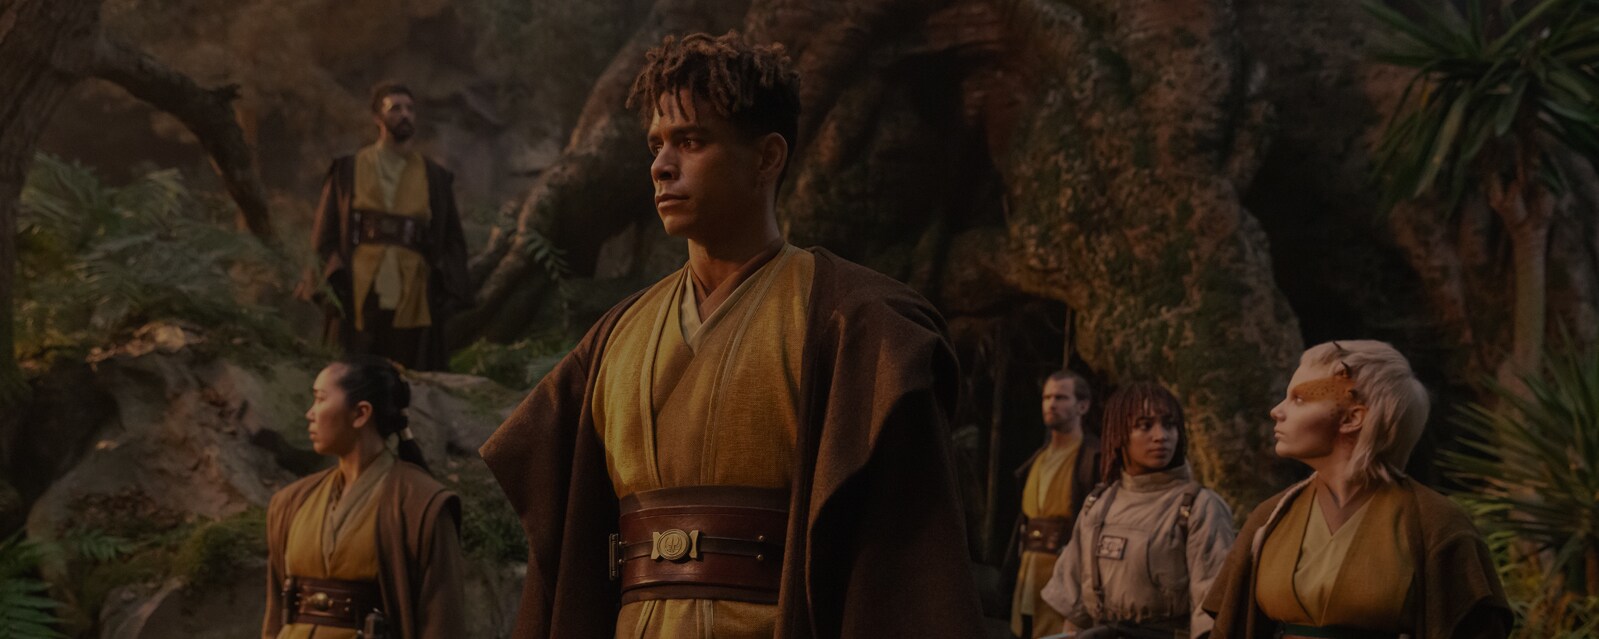 Yord with other members of the Jedi Order